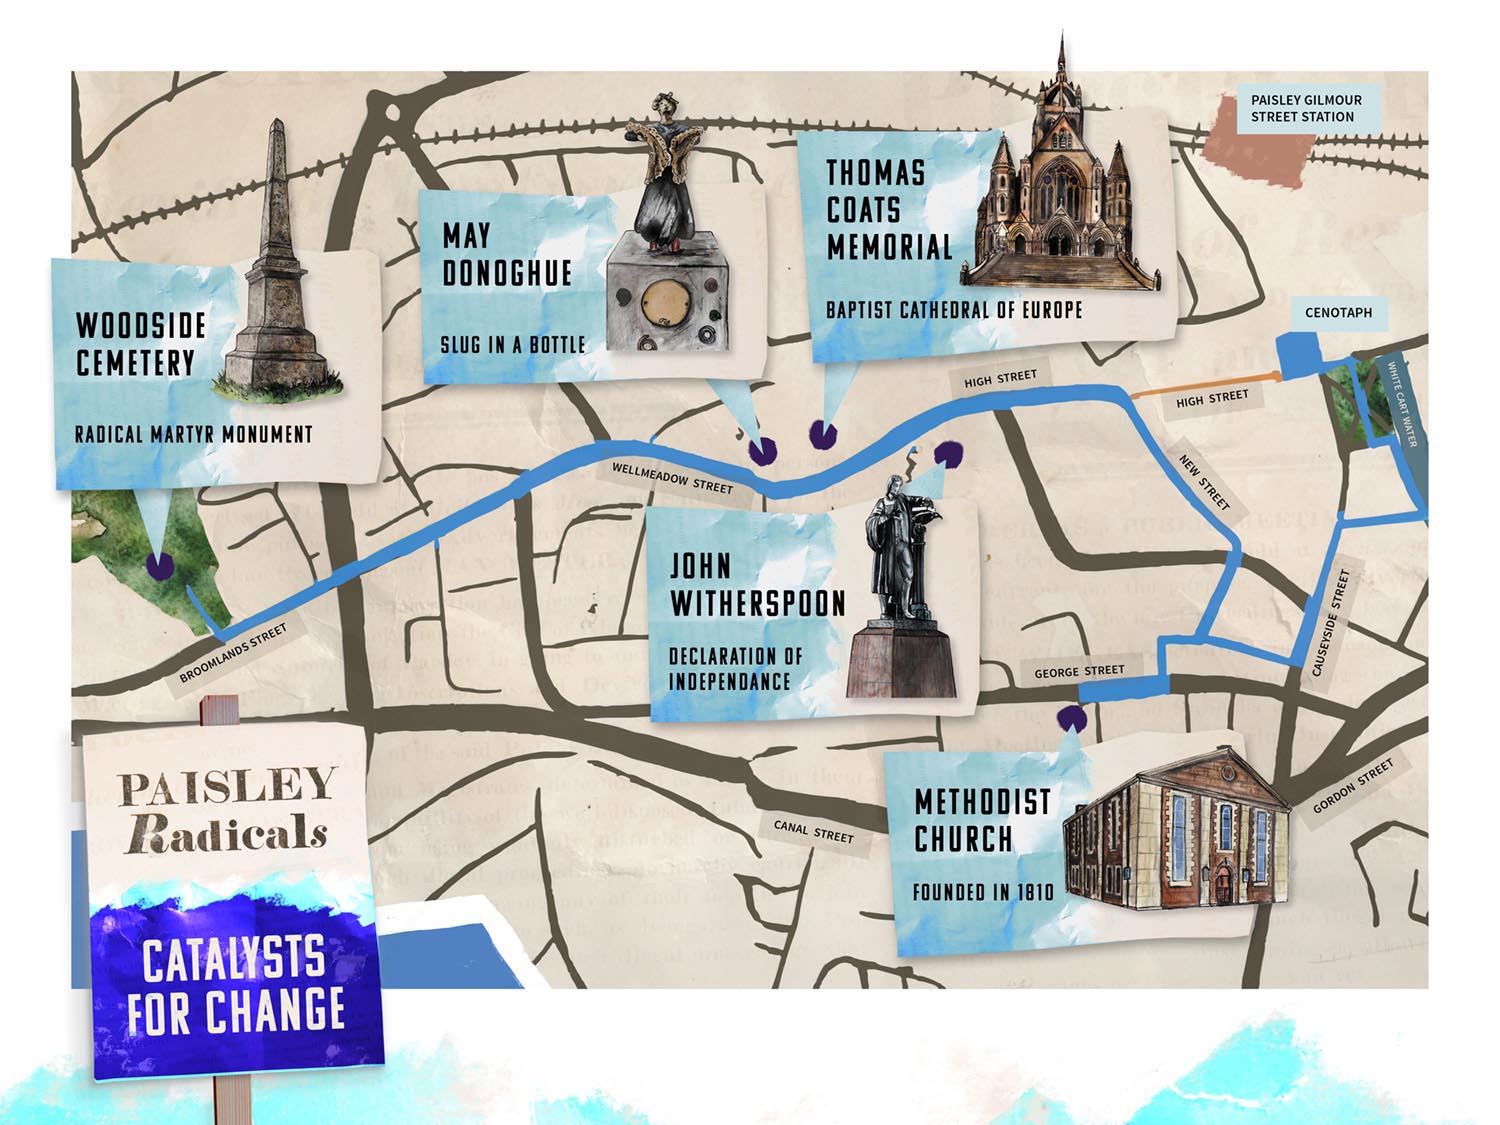 Paisley Radicals Catalysts for Change Map - Illustrated by Josef McFadden